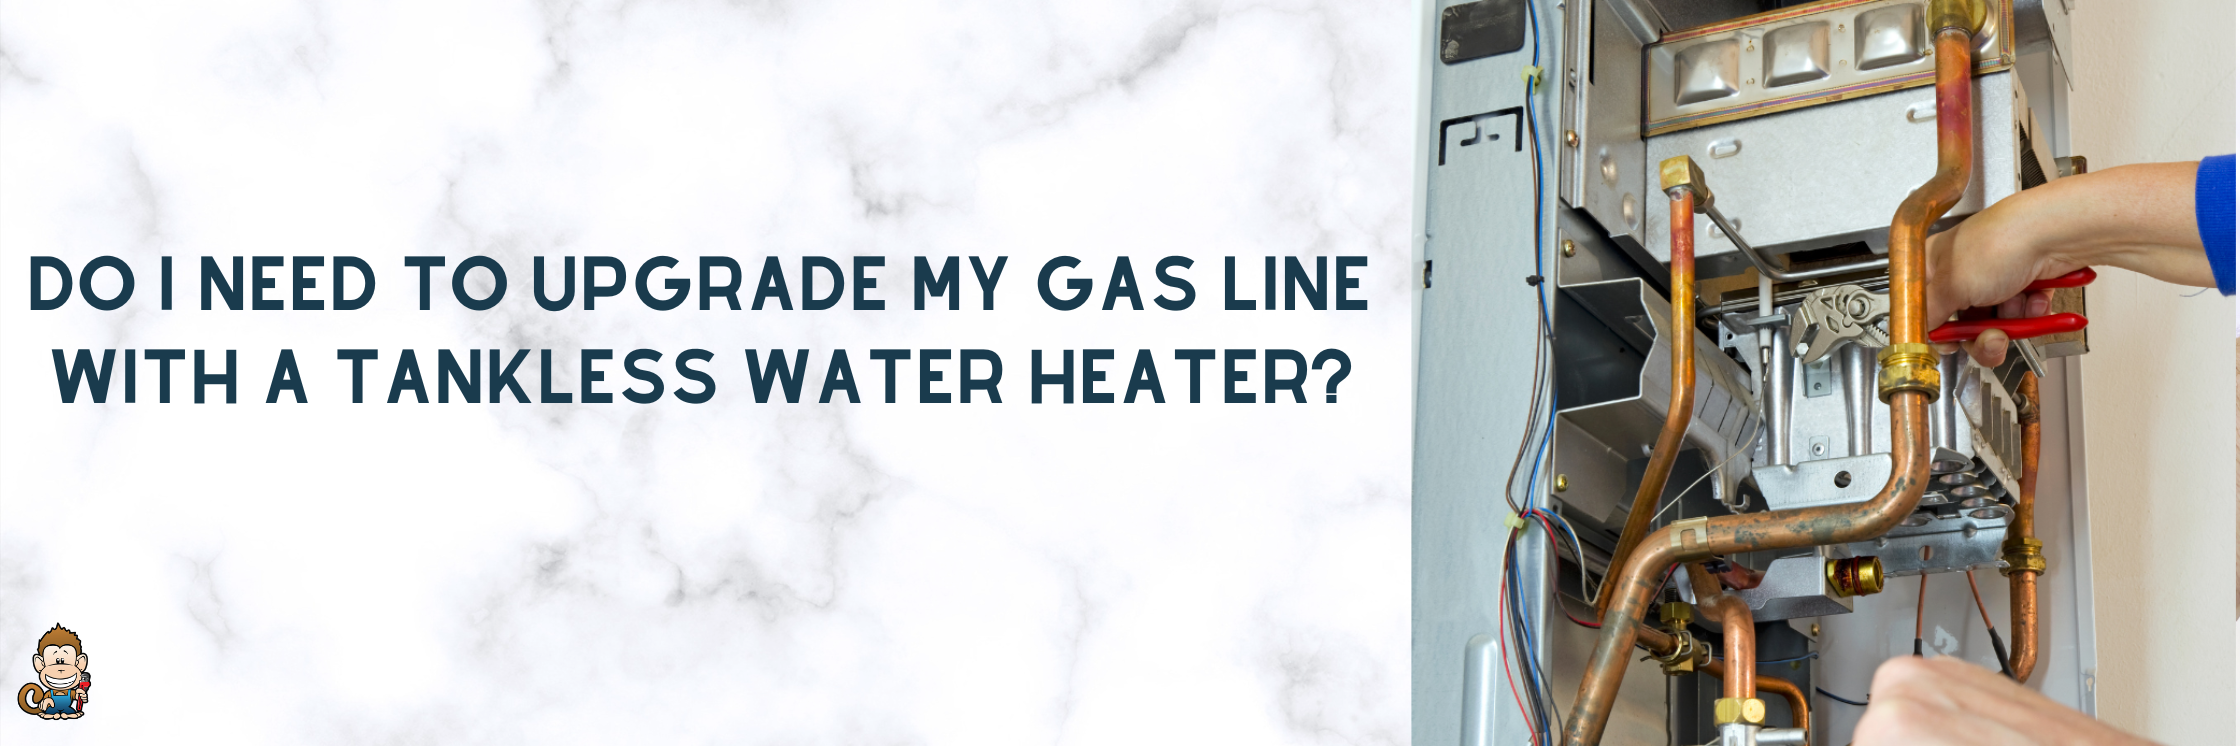 Do I Need to Upgrade My Gas Line with a Tankless Water Heater?